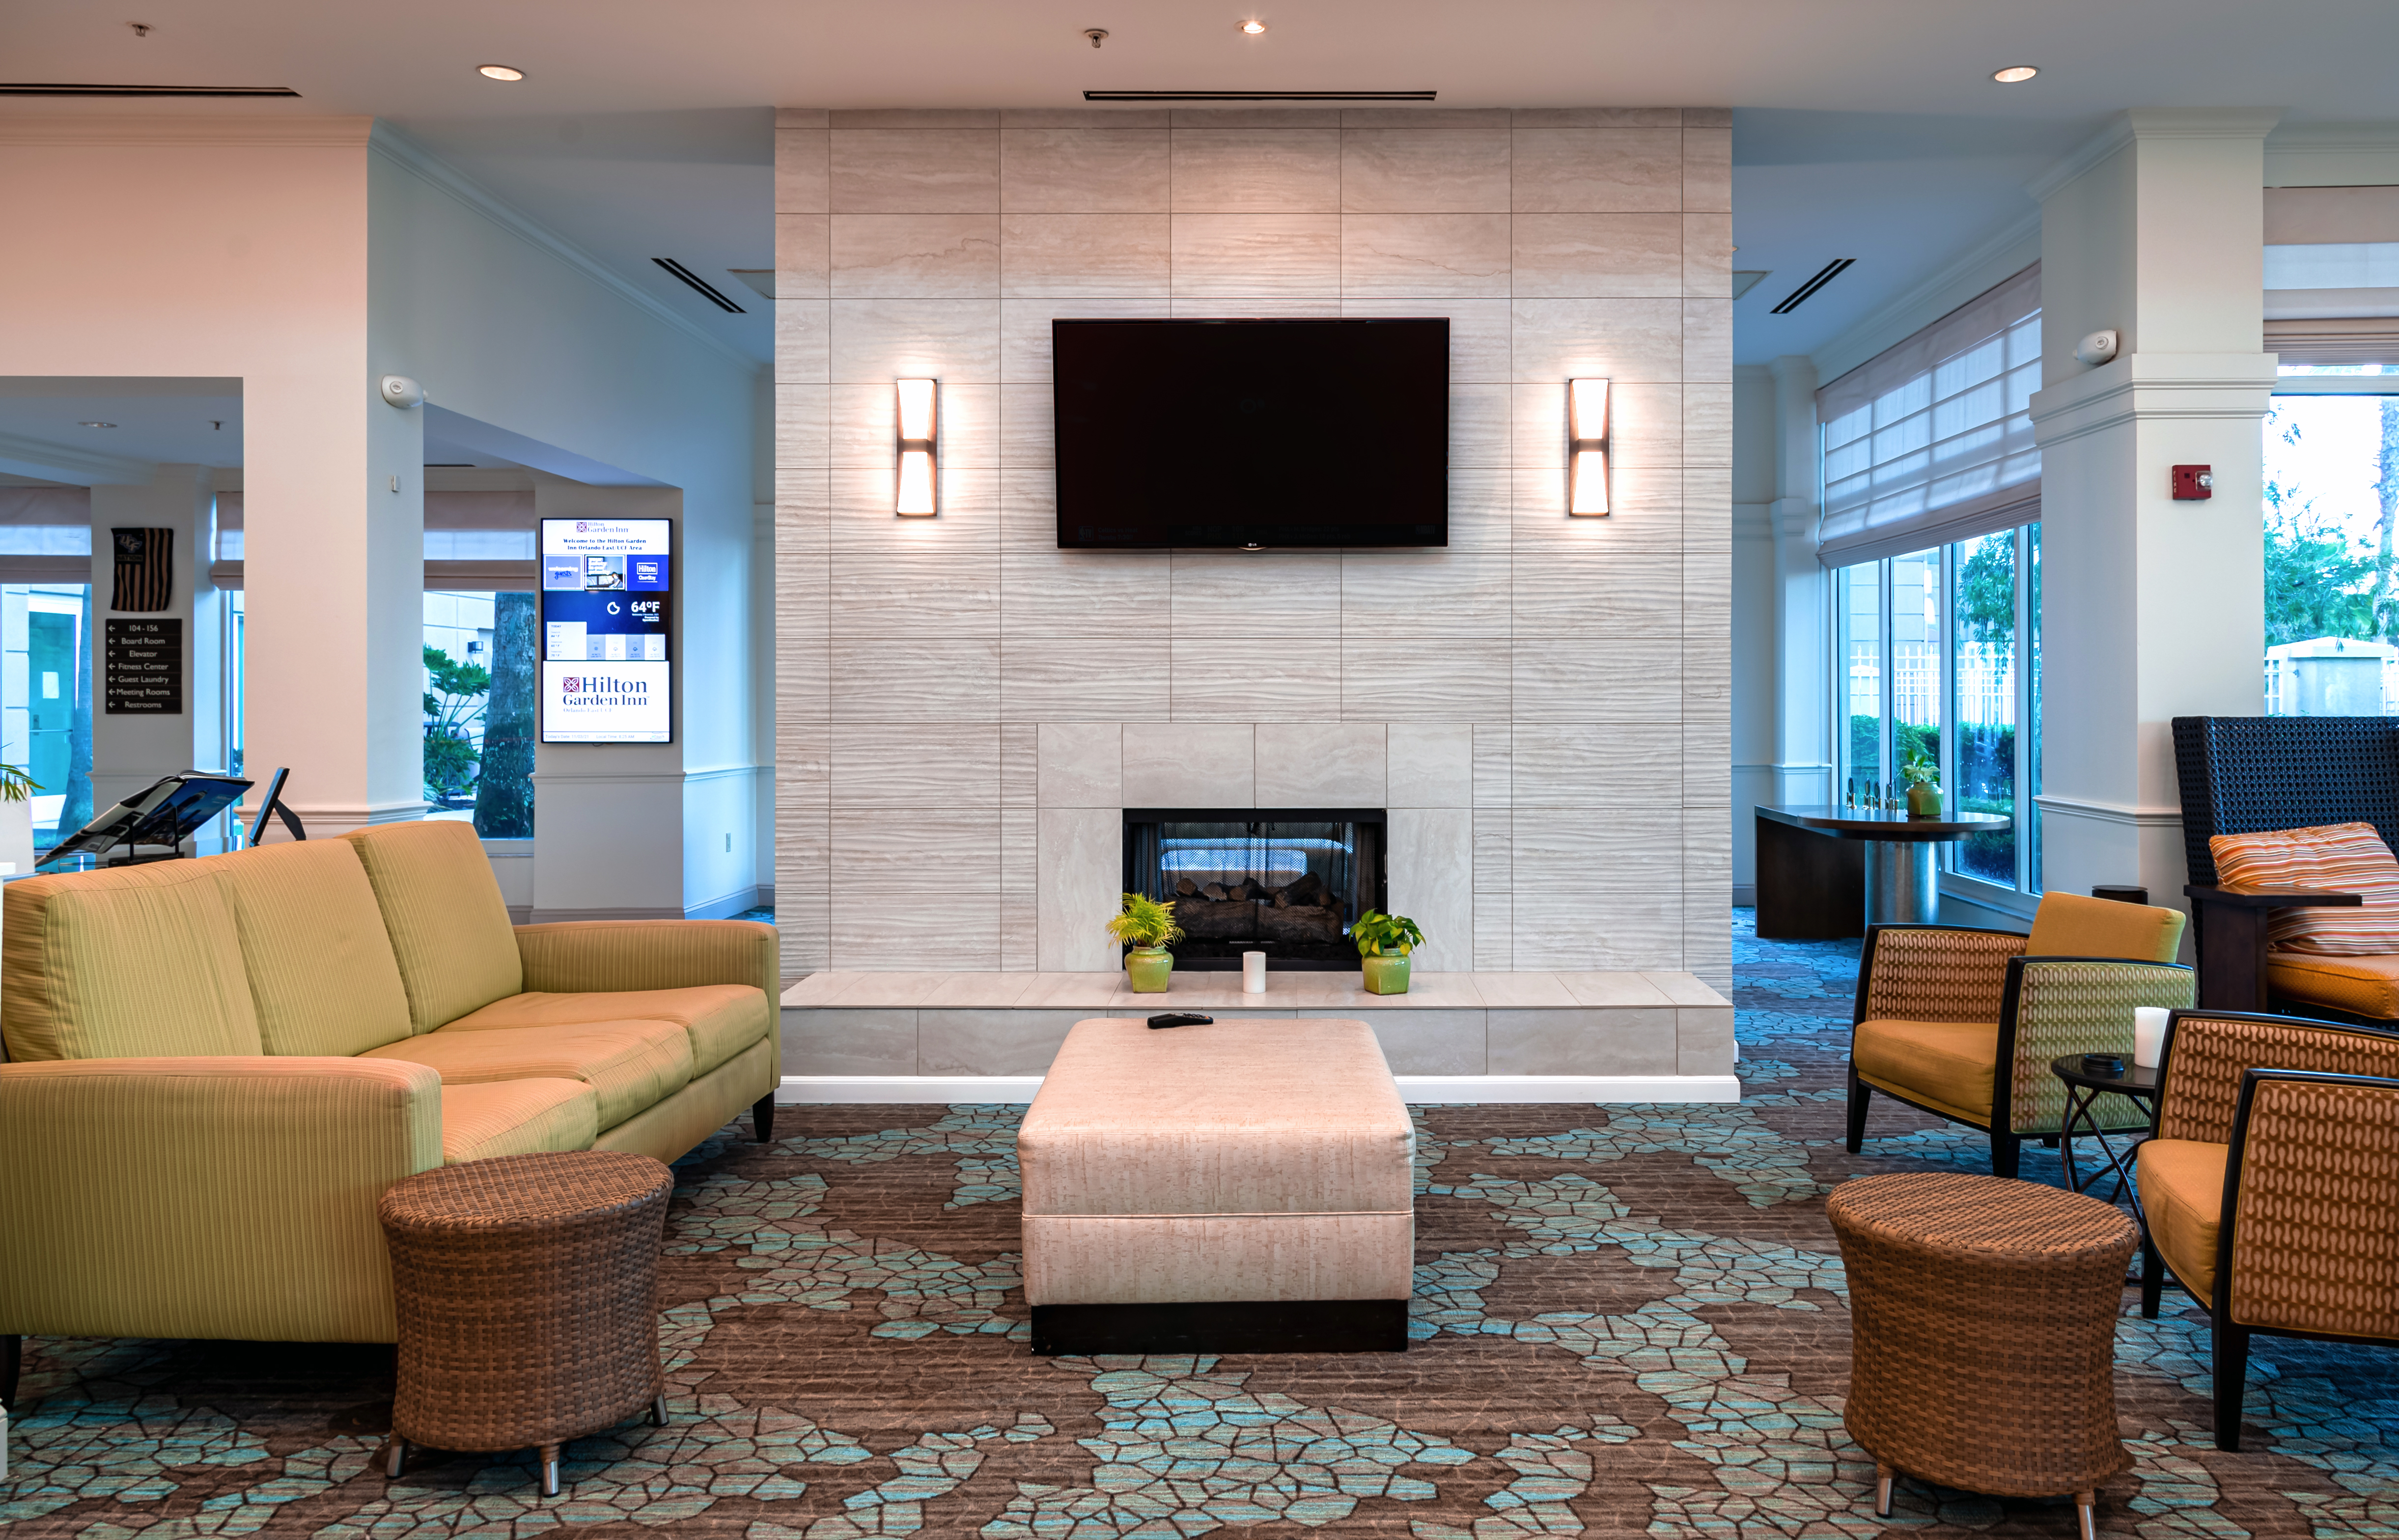 View of Lobby Area with Fireplace and HDTV